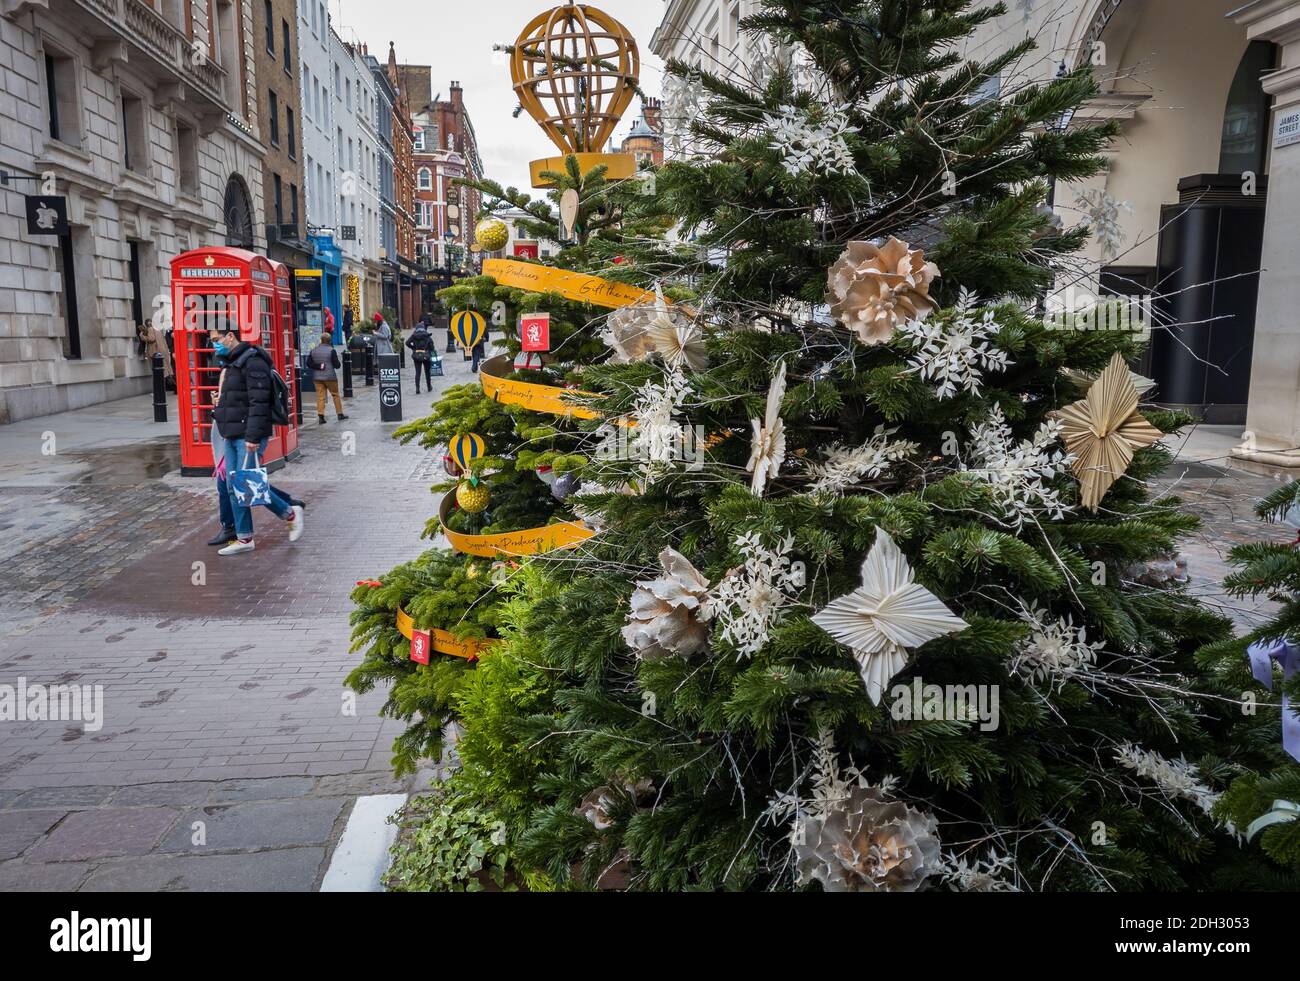 Christmas decorations in London Covent Garden with few visitors. Covid-19 lockdown and Covid Tiers have had serious impacted the hospitality industry. Stock Photo